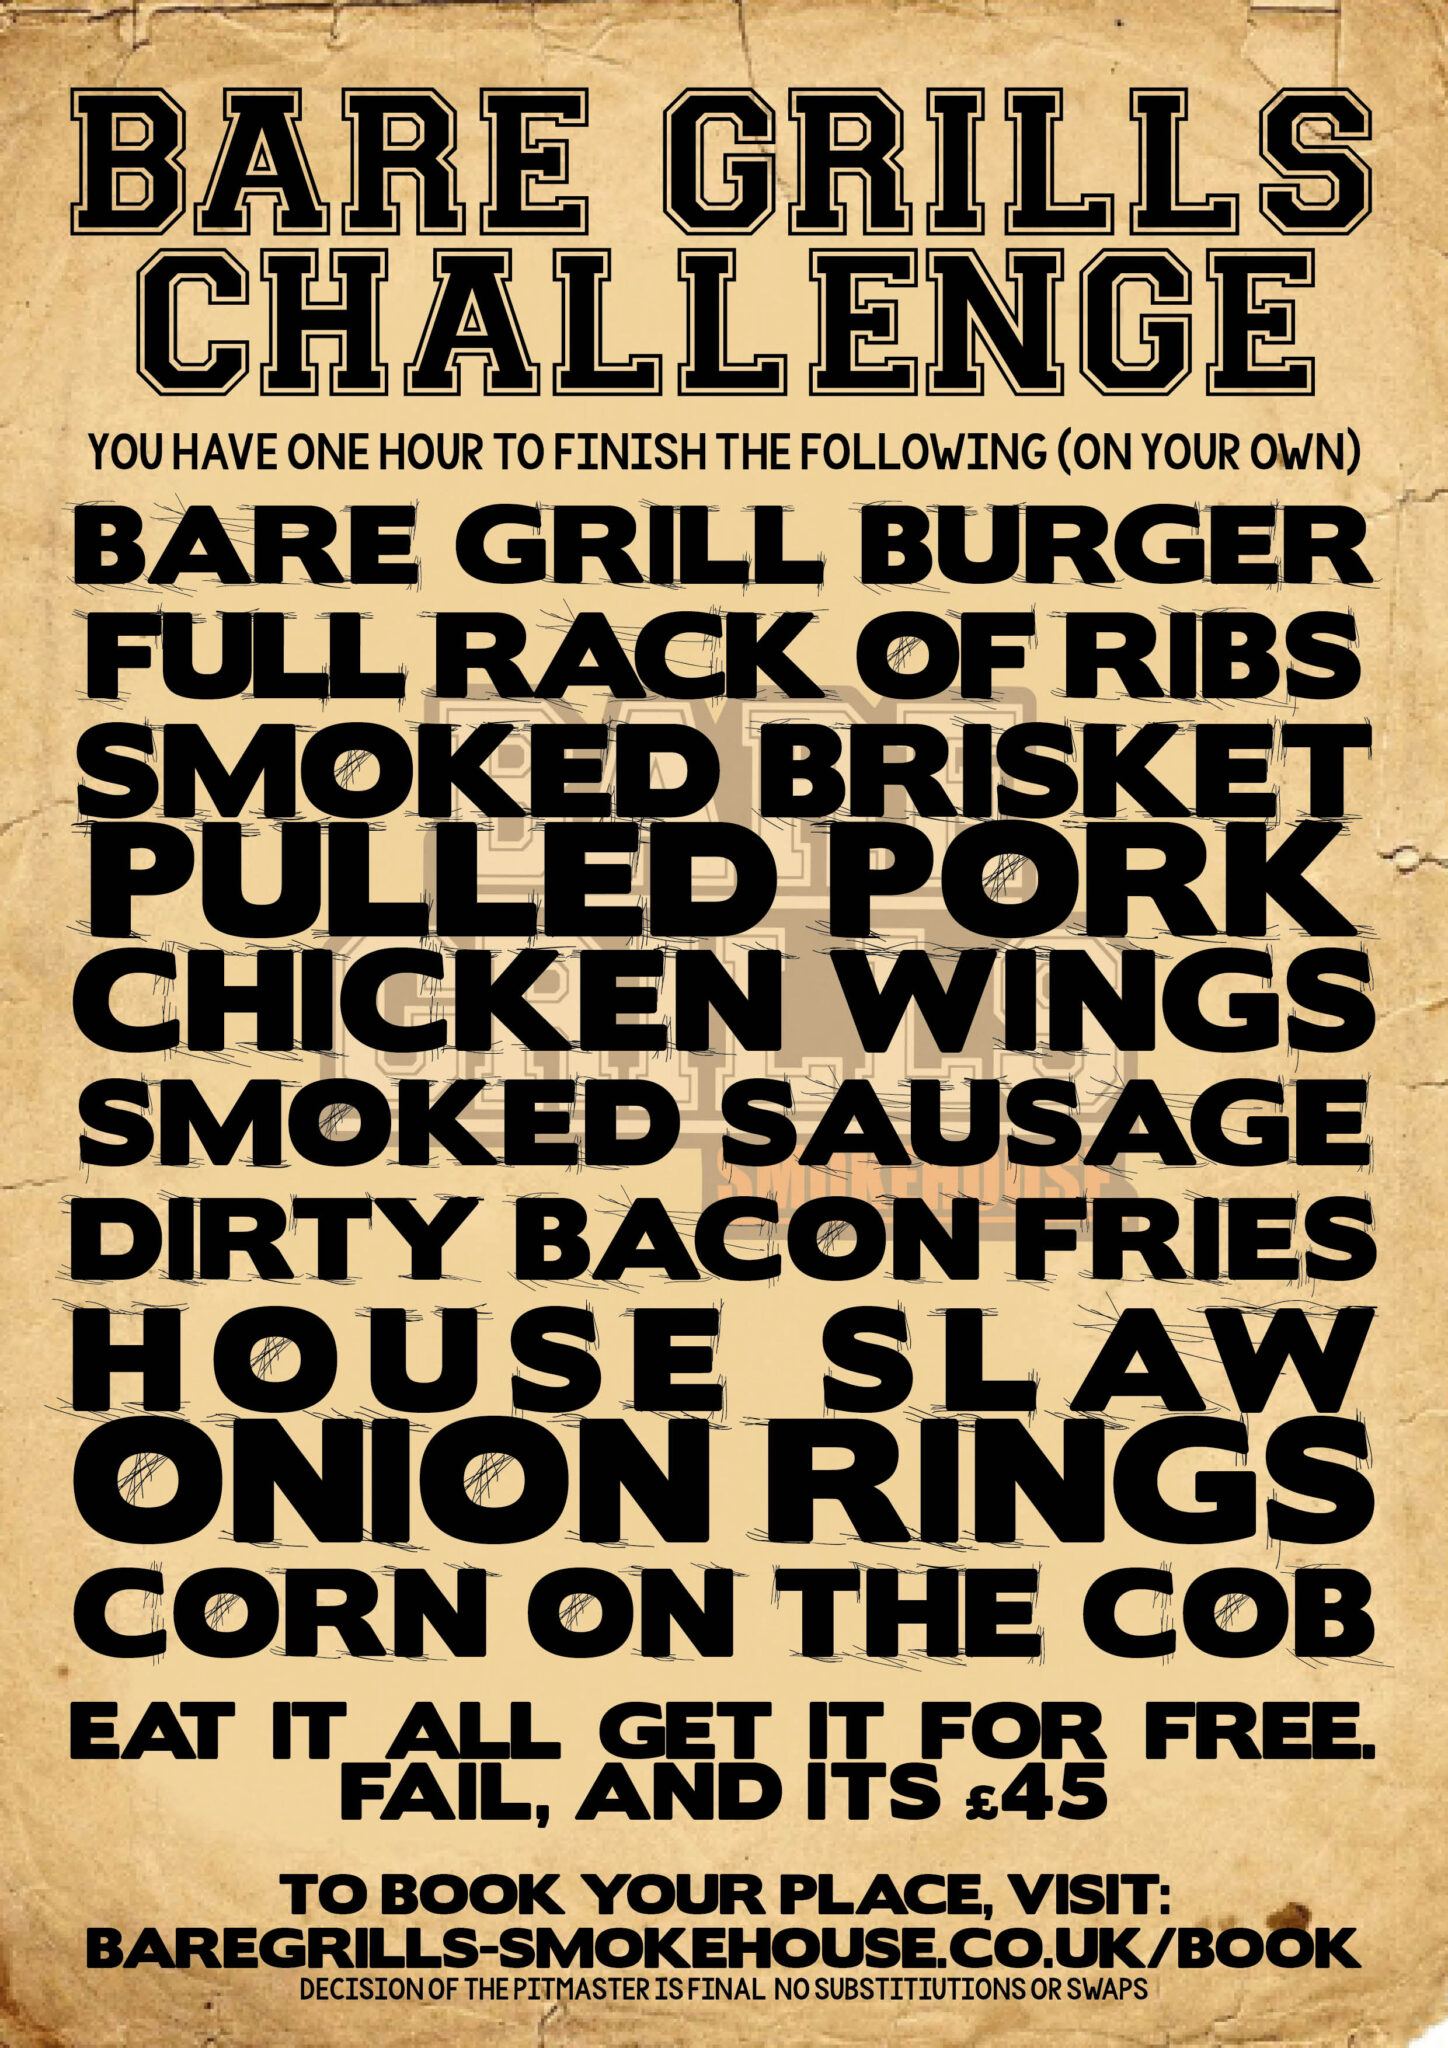 Can you complete the Bare Grills Challenge & get your meal for free?